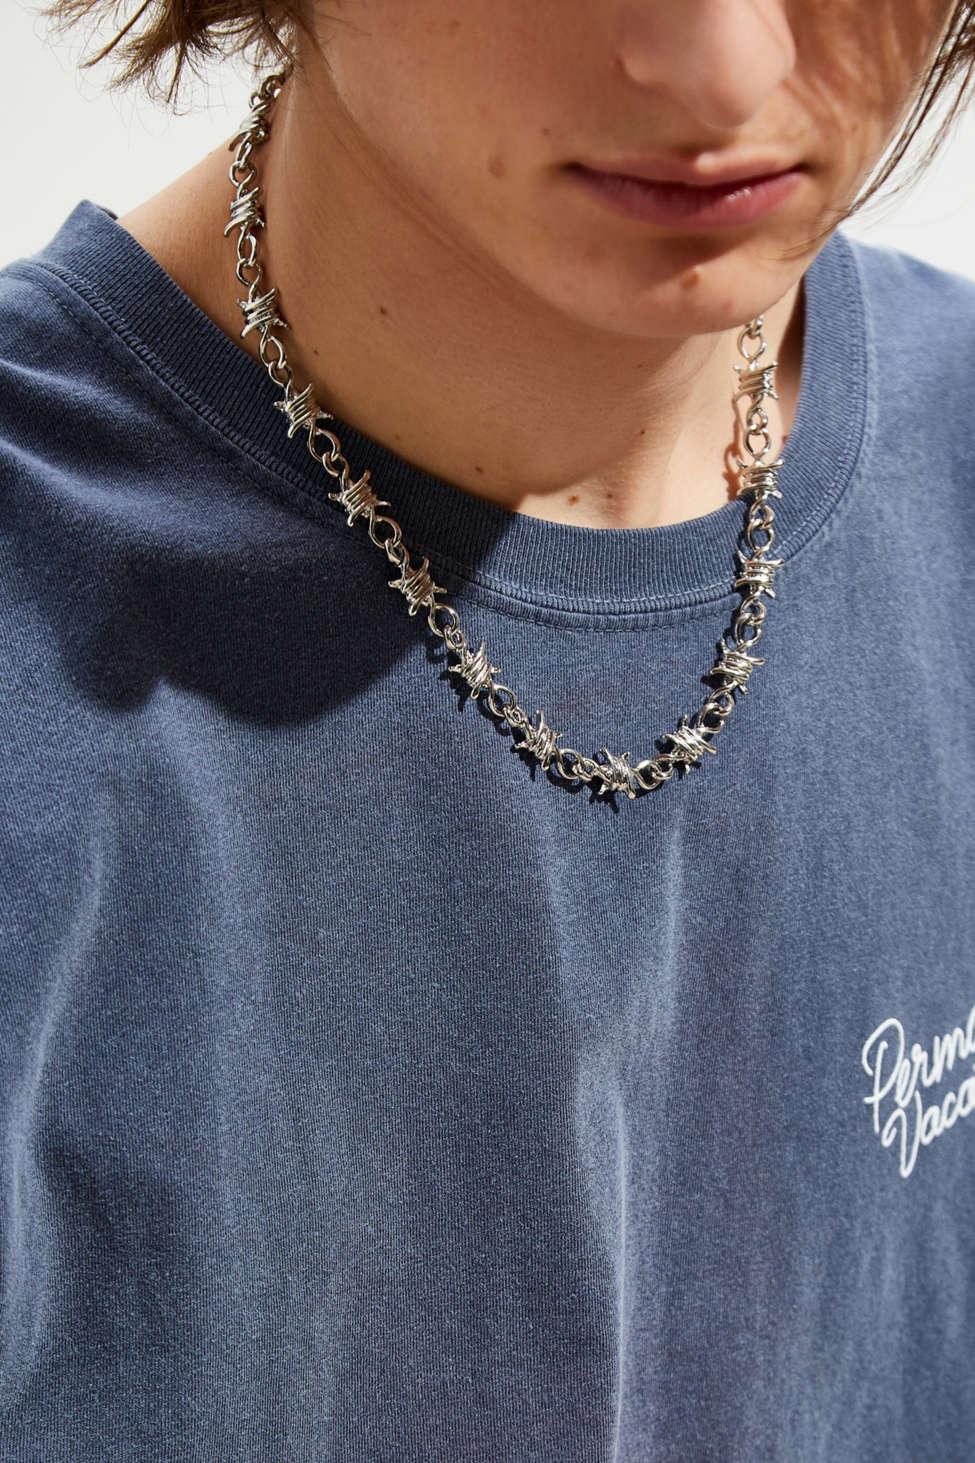 Urban Outfitters Barbed Wire Necklace in Metallic for Men - Lyst